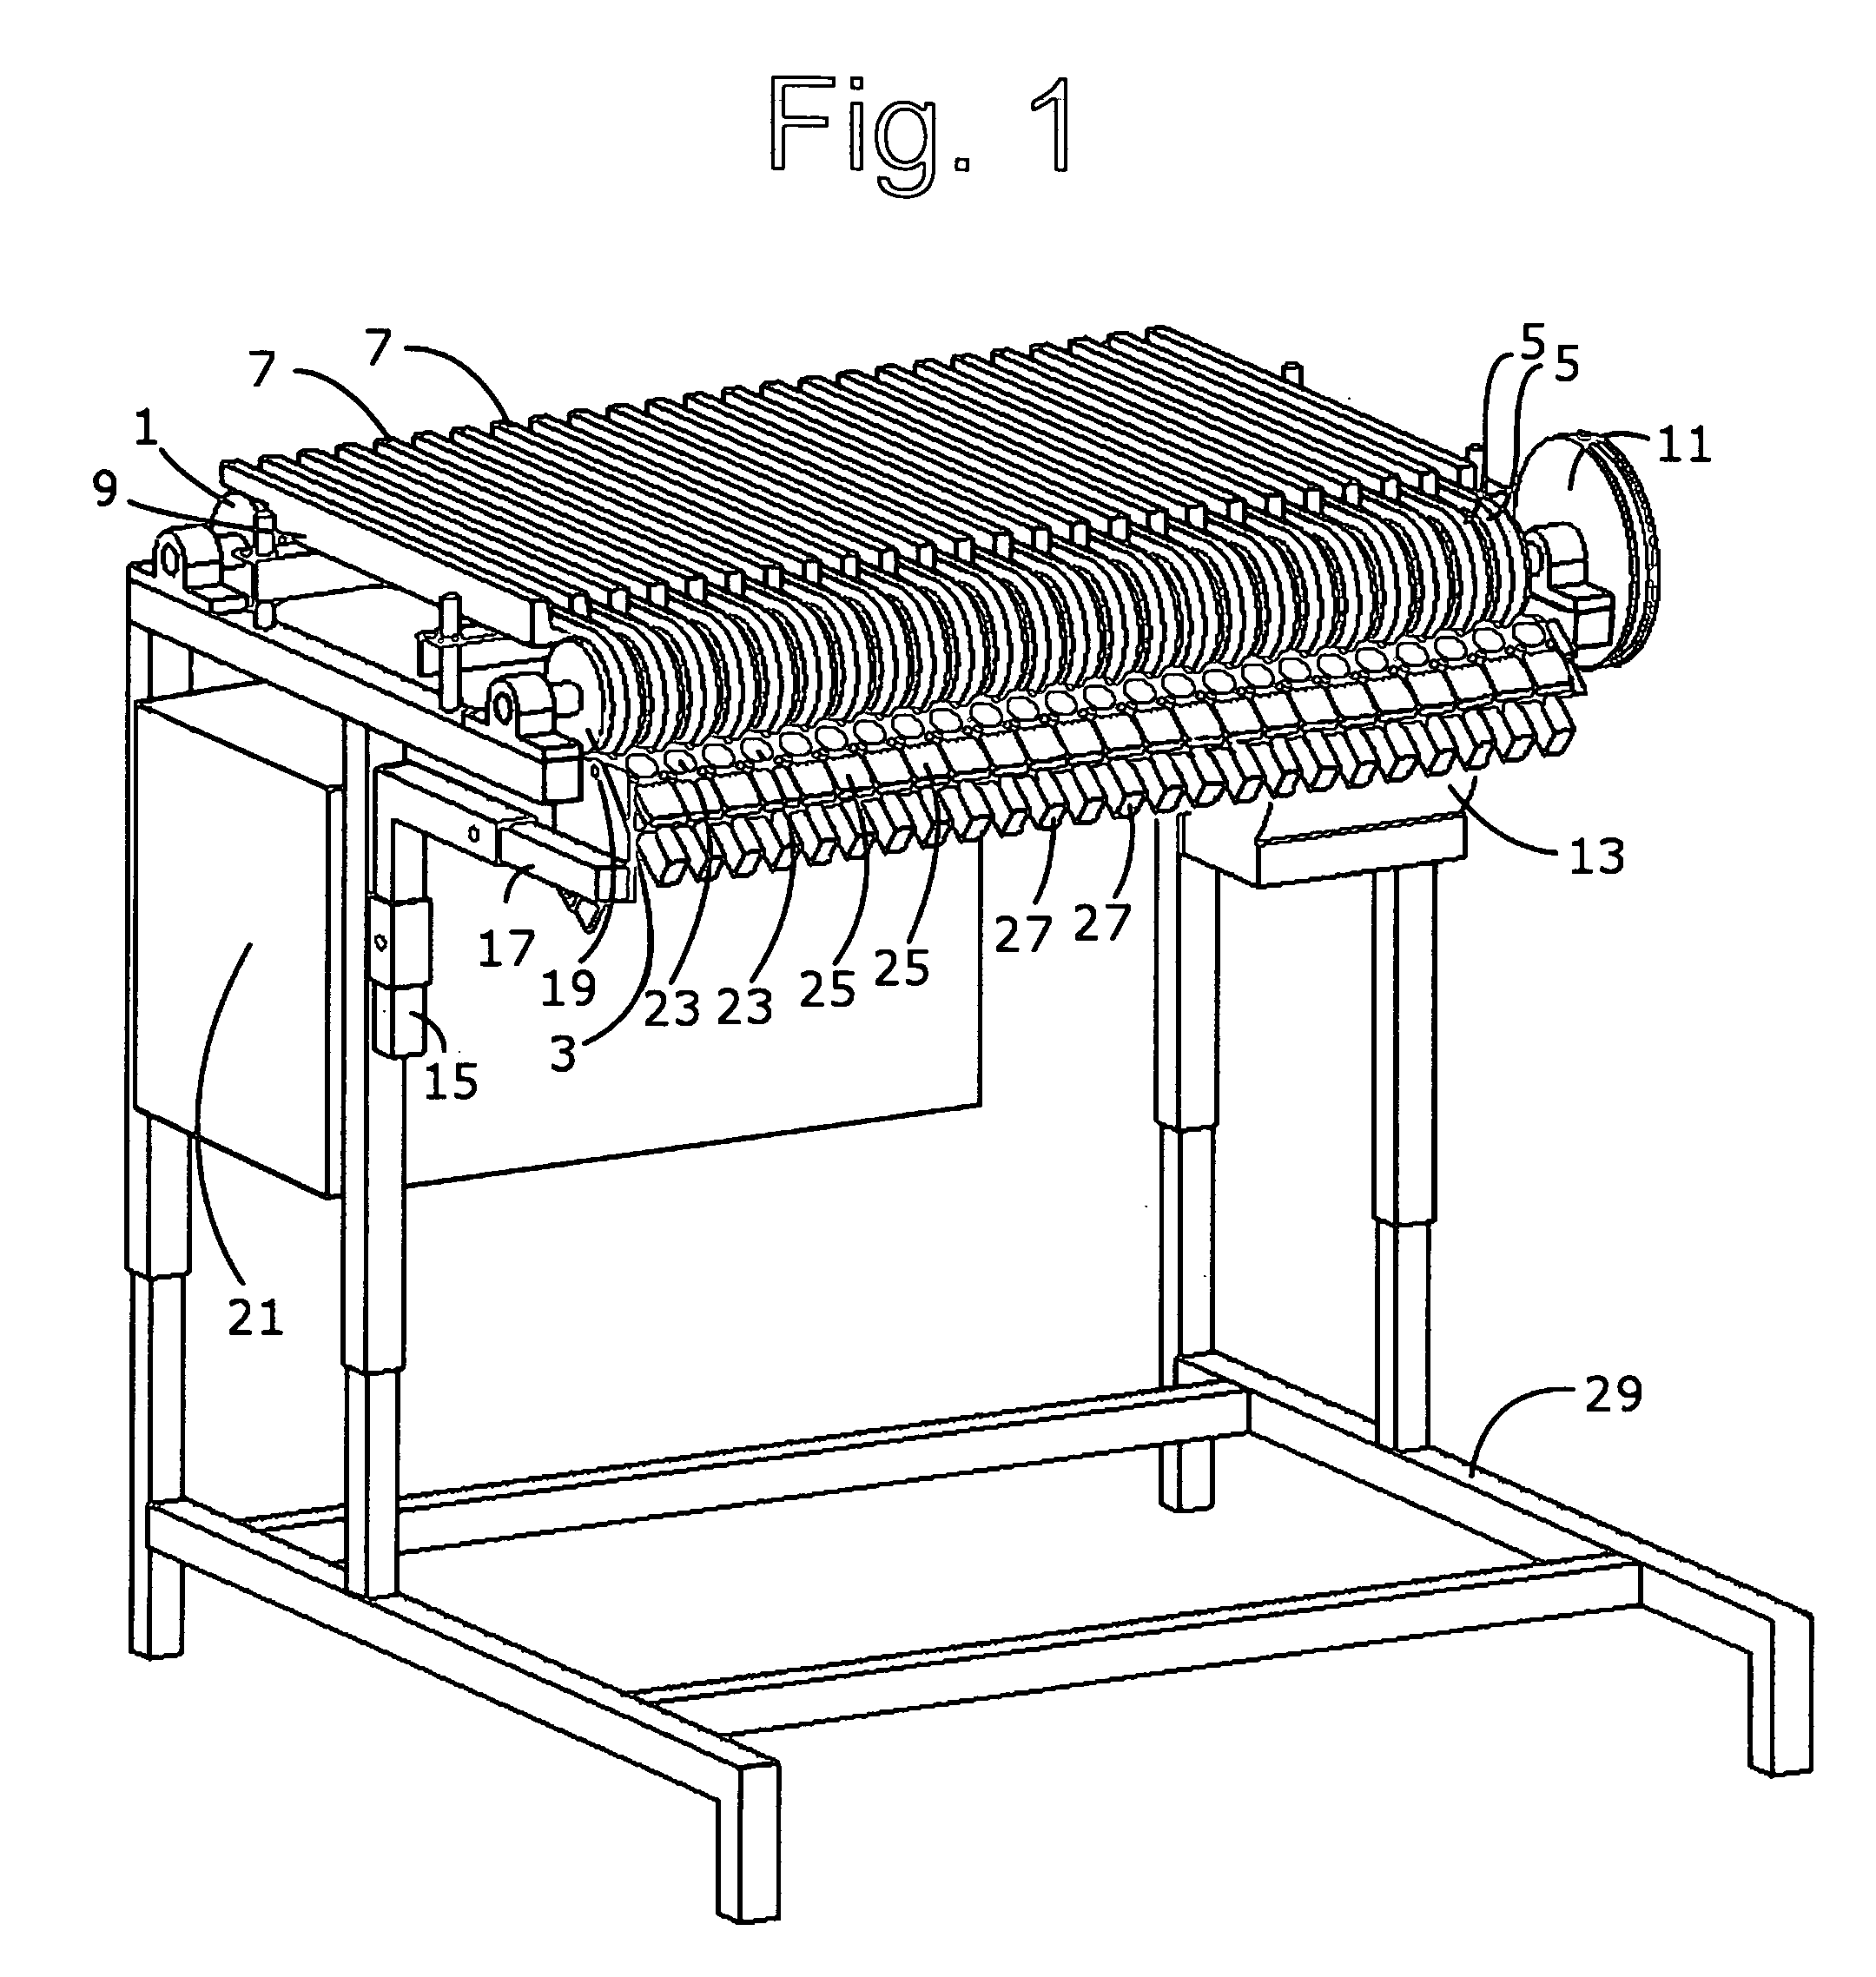 System and method for automated tactile sorting